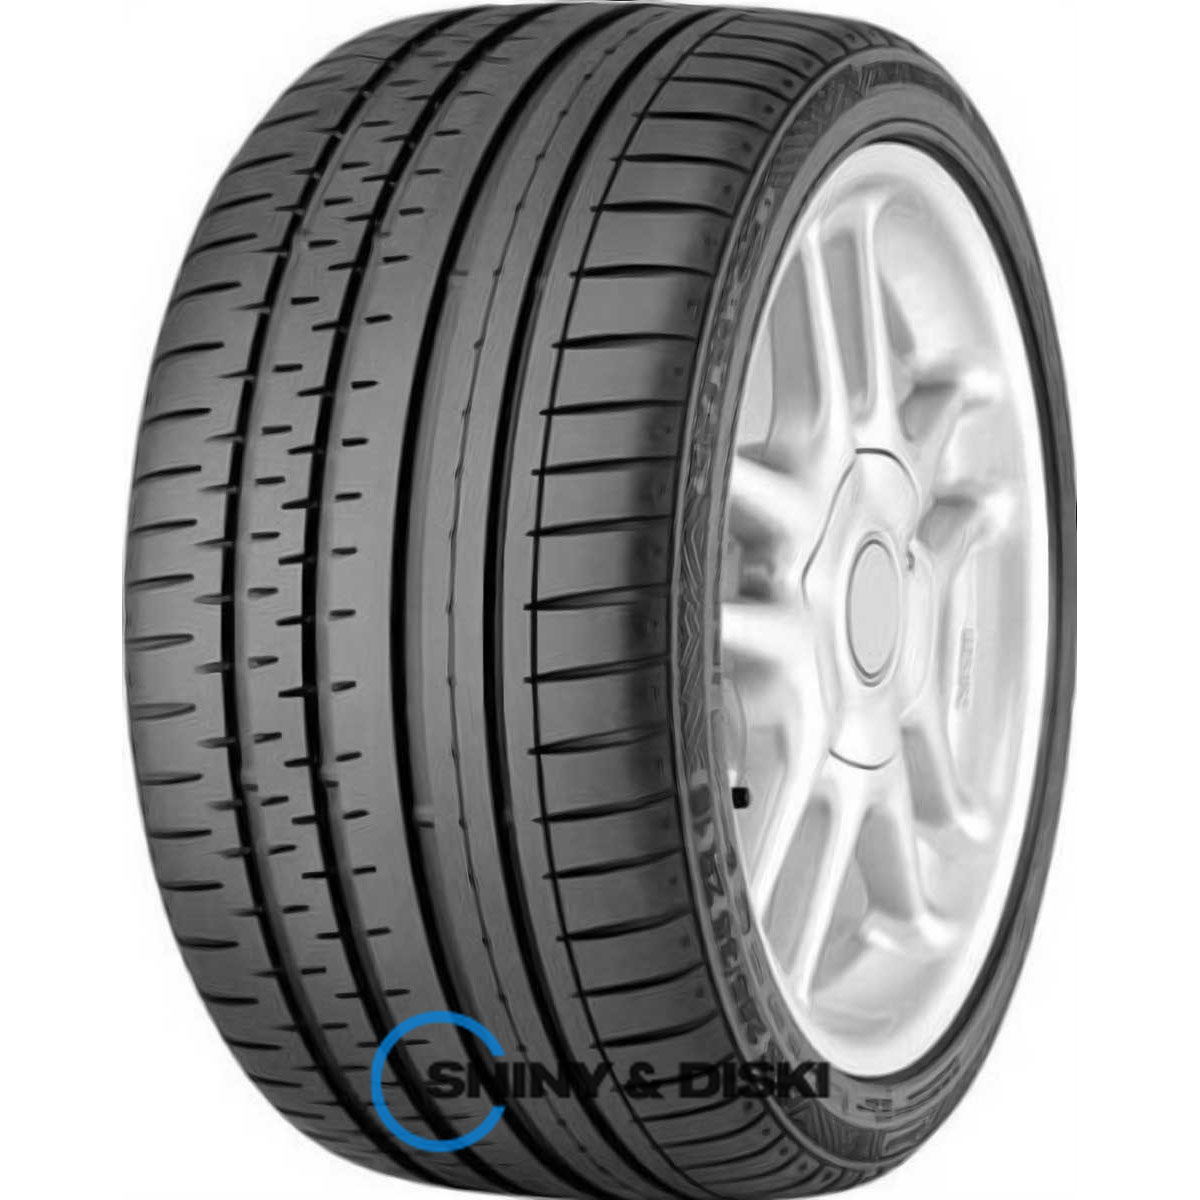 continental sportcontact 2 265/40 r21 105y mo